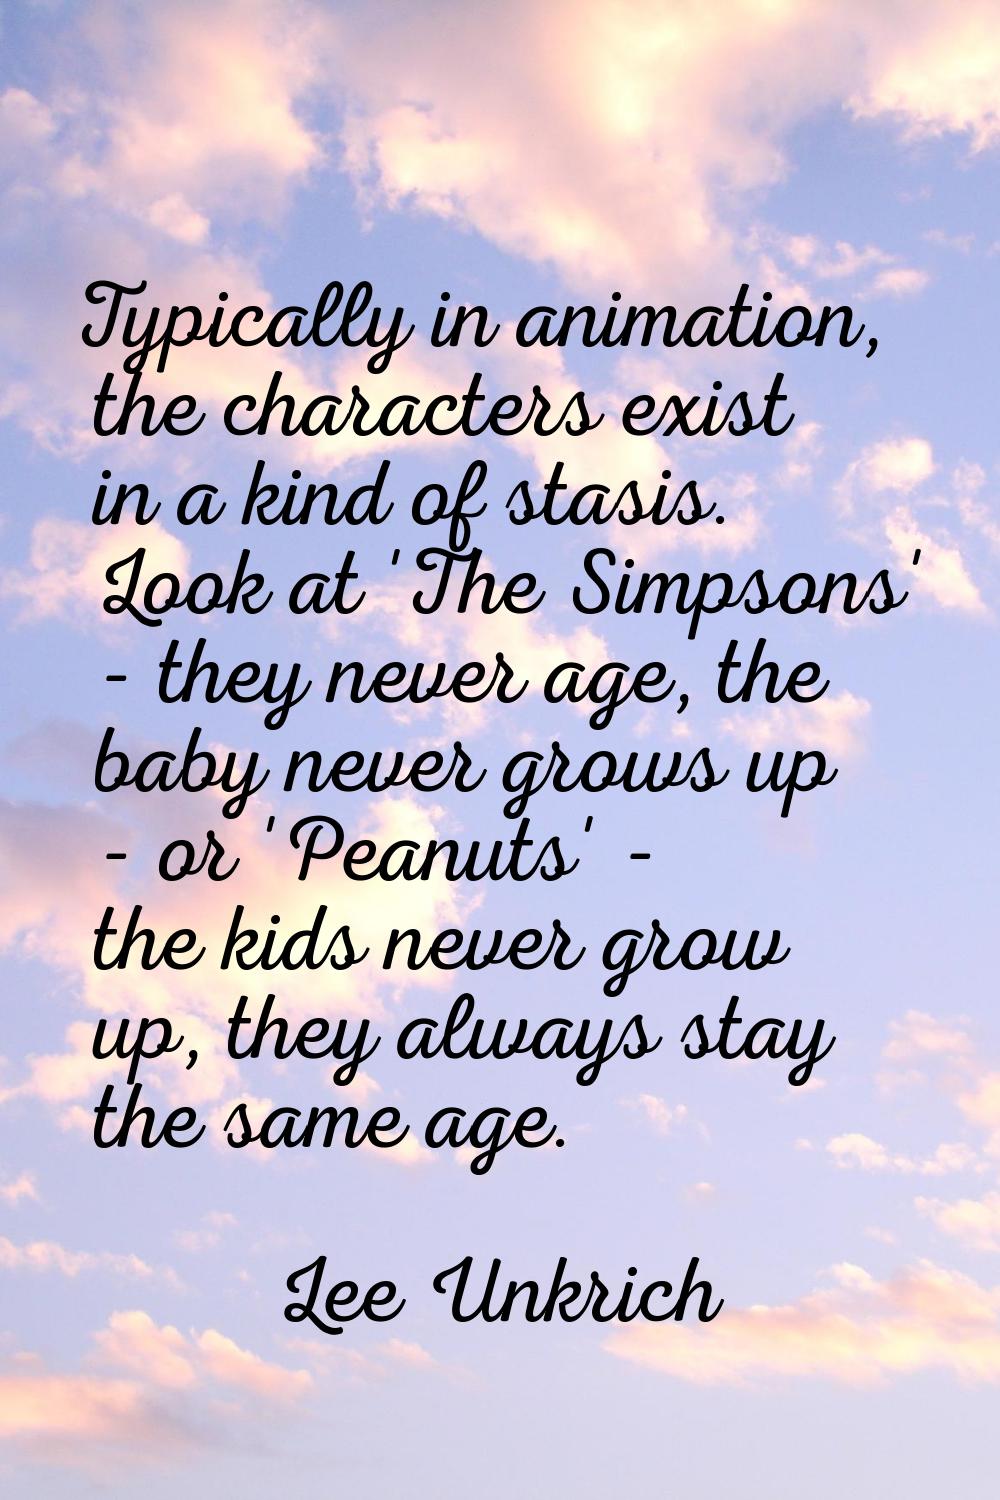 Typically in animation, the characters exist in a kind of stasis. Look at 'The Simpsons' - they nev